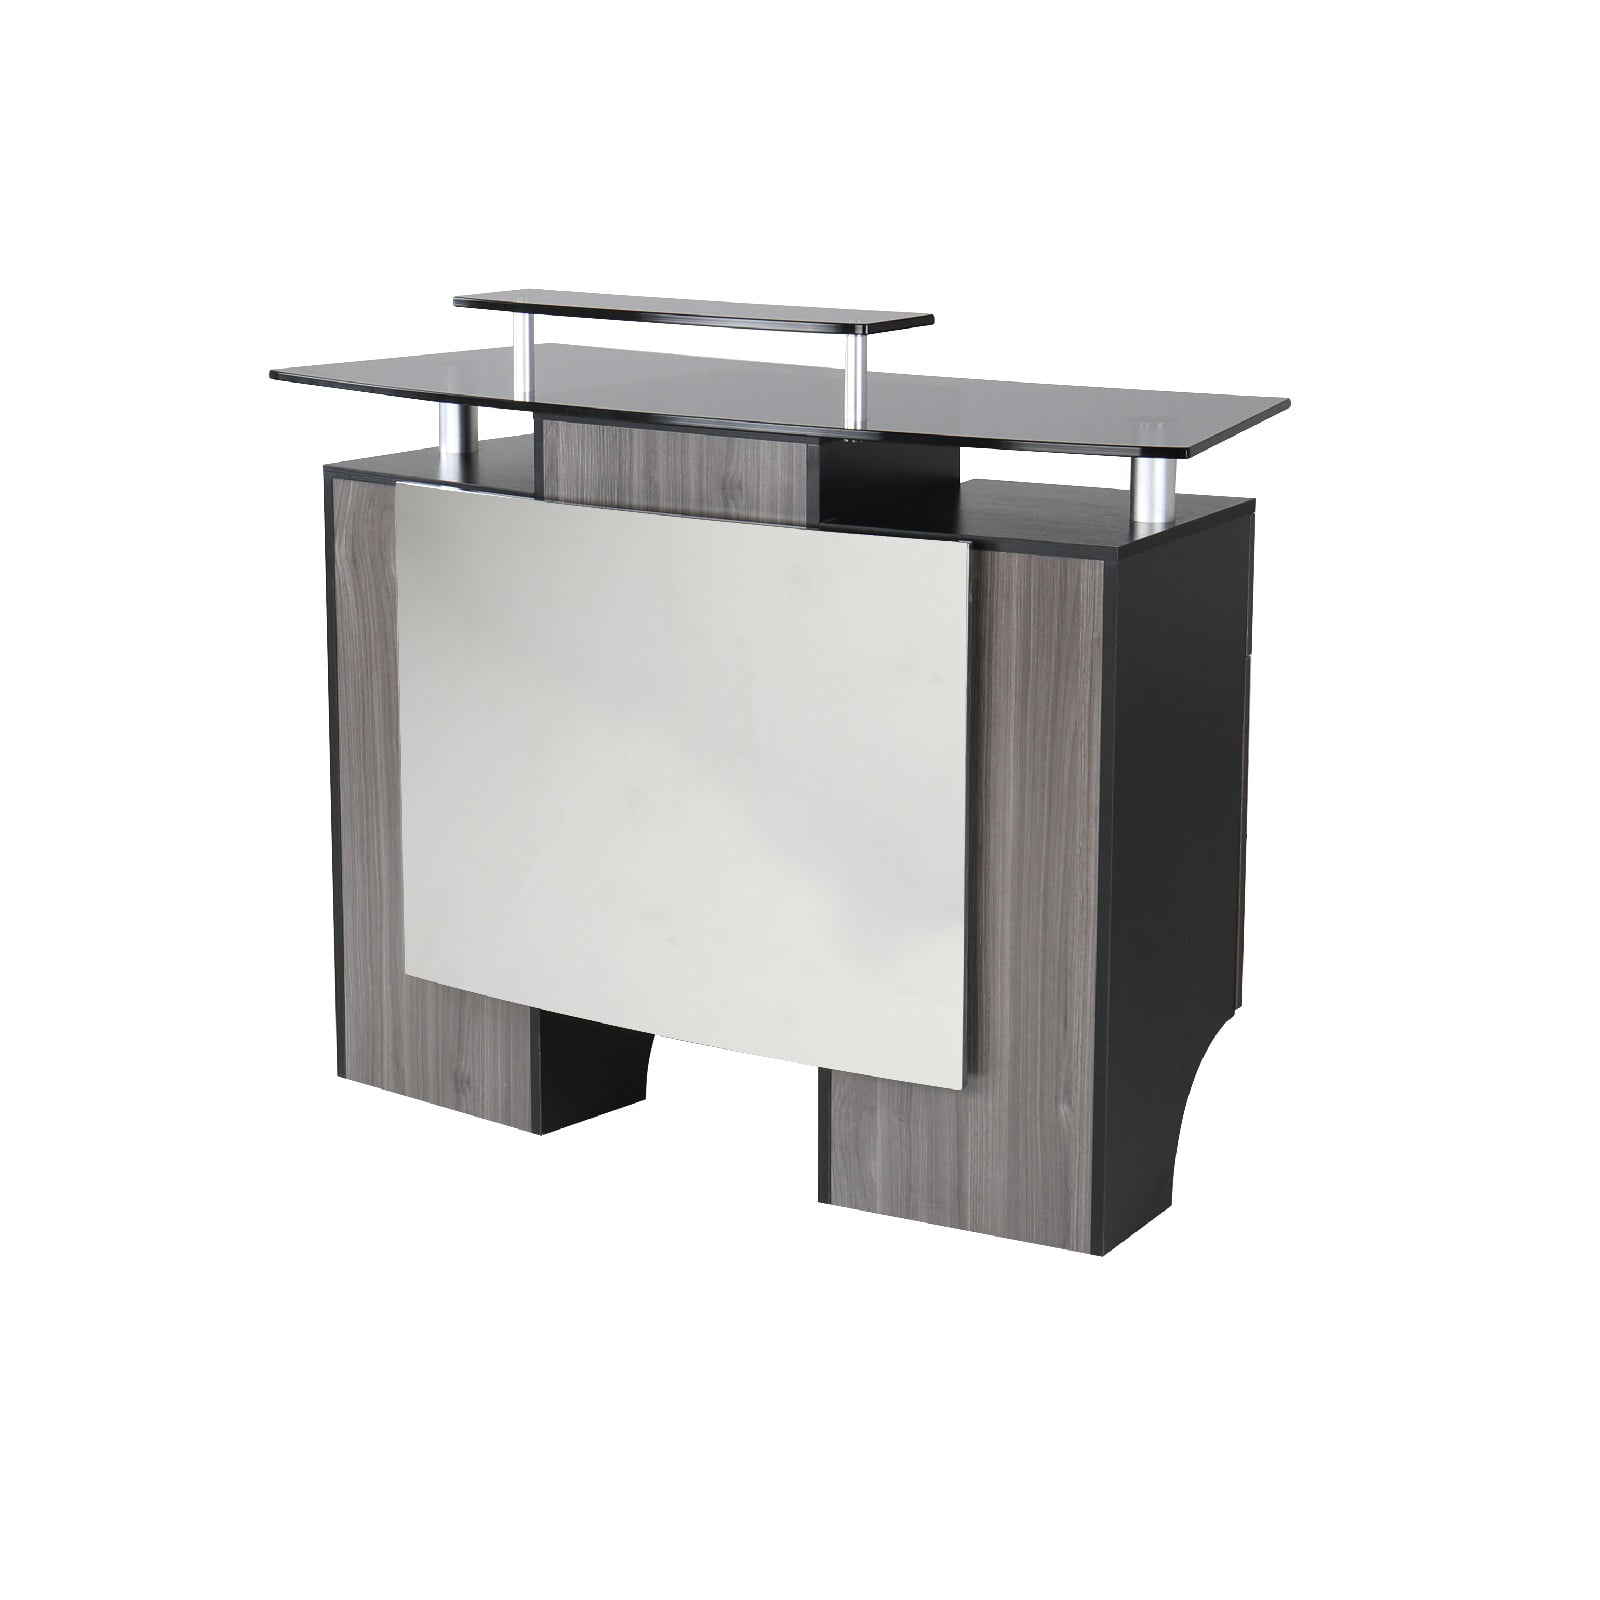 Side Cabinets MAYAKOBA Sonoma II Reception Desk with Glass Display Adjustable Shelves Luxe Black/Silver Accents Office Restaurant Beauty Salon Furniture 